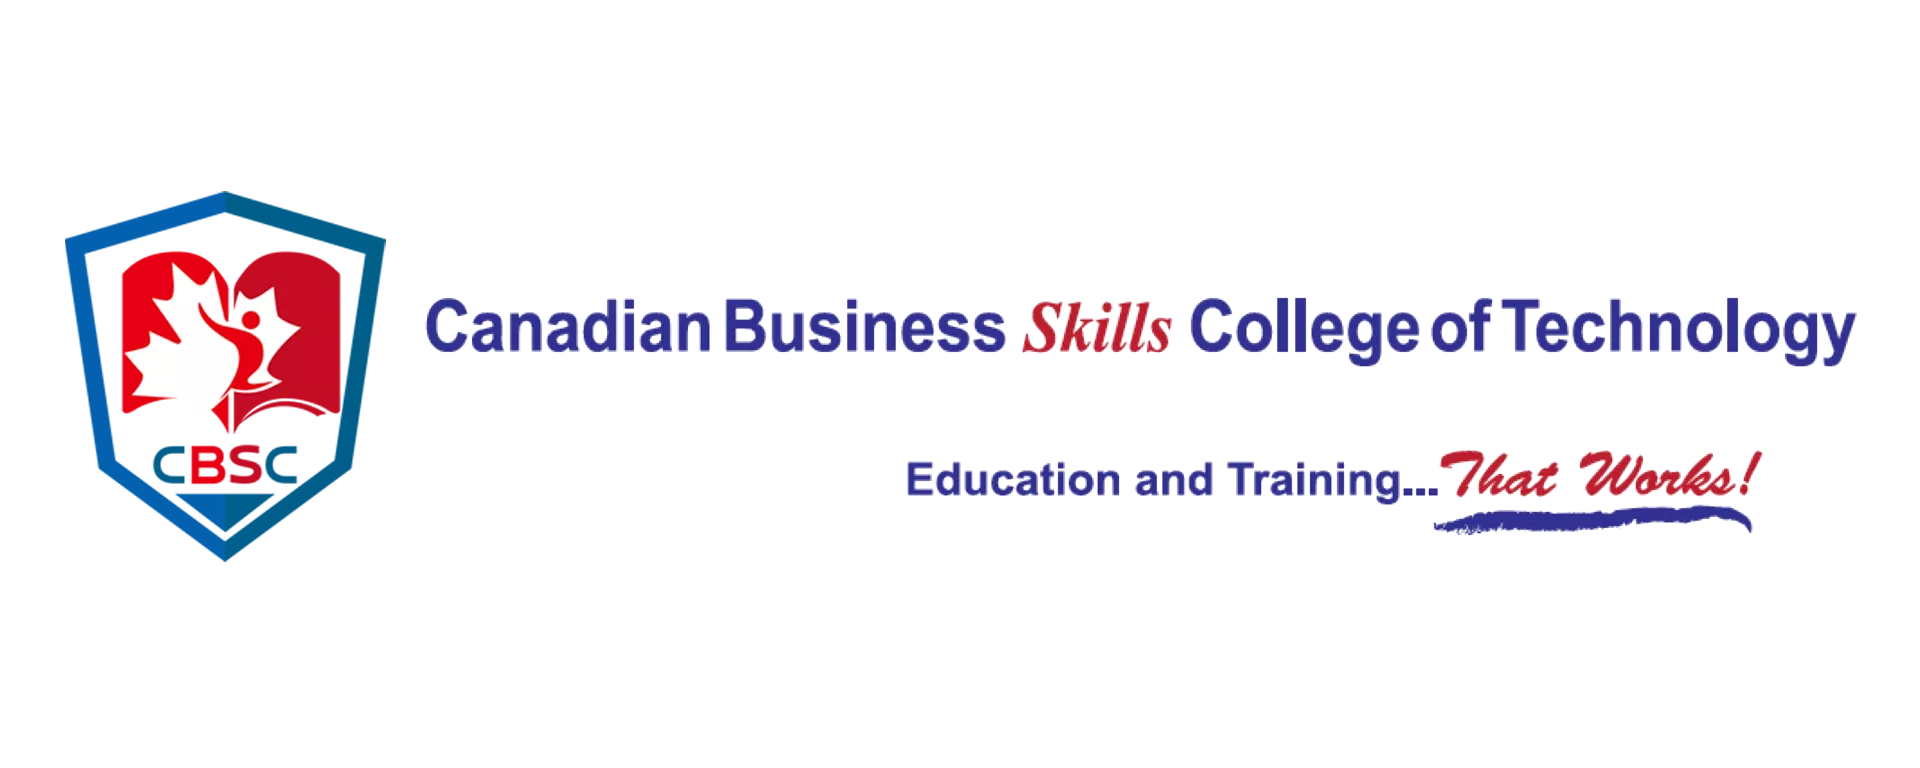 Canadian Business Skills College of Technology